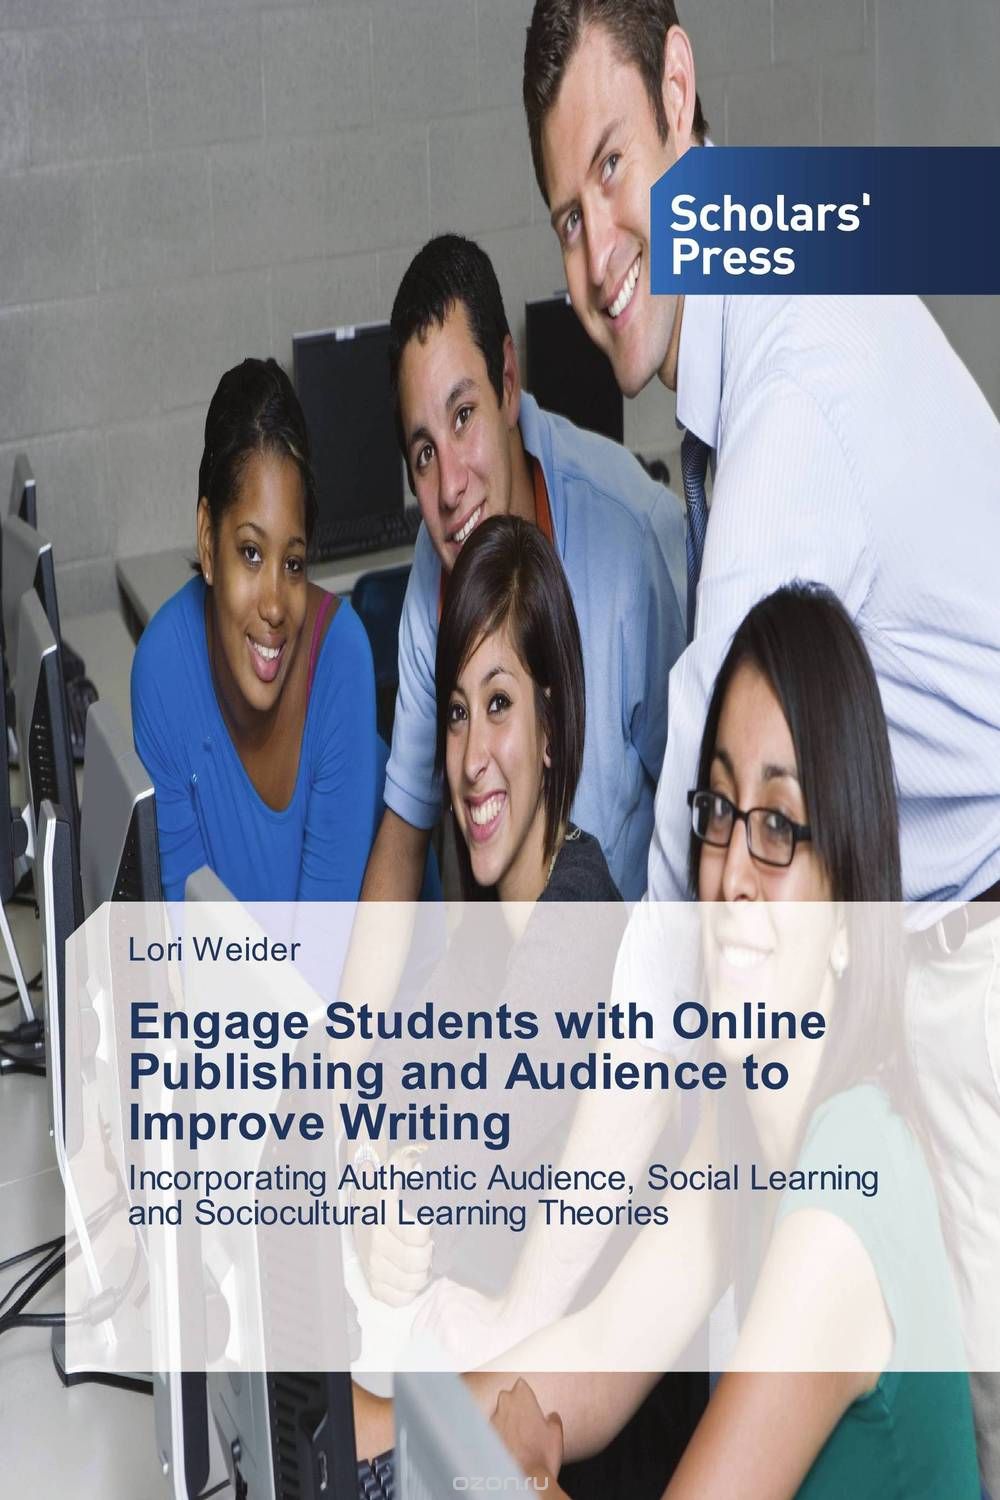 Скачать книгу "Engage Students with Online Publishing and Audience to Improve Writing"